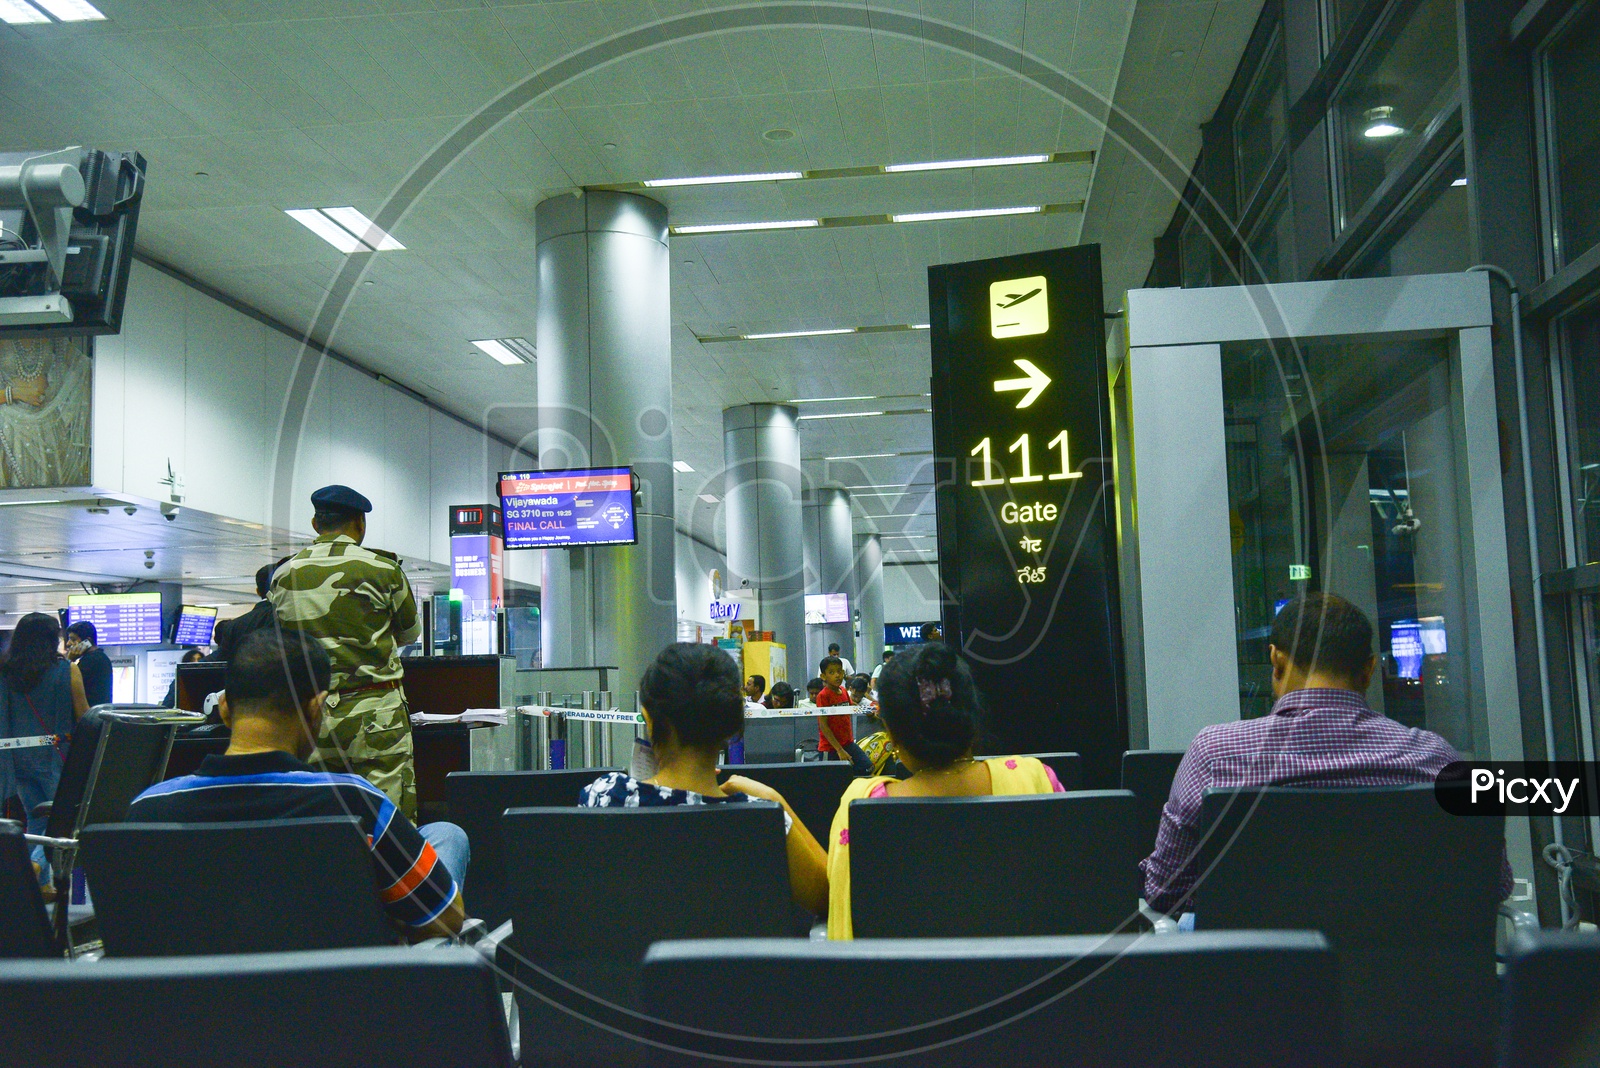 airport Scenes With  Passengers Waiting in the  Waiting Lounge  And Display Screens